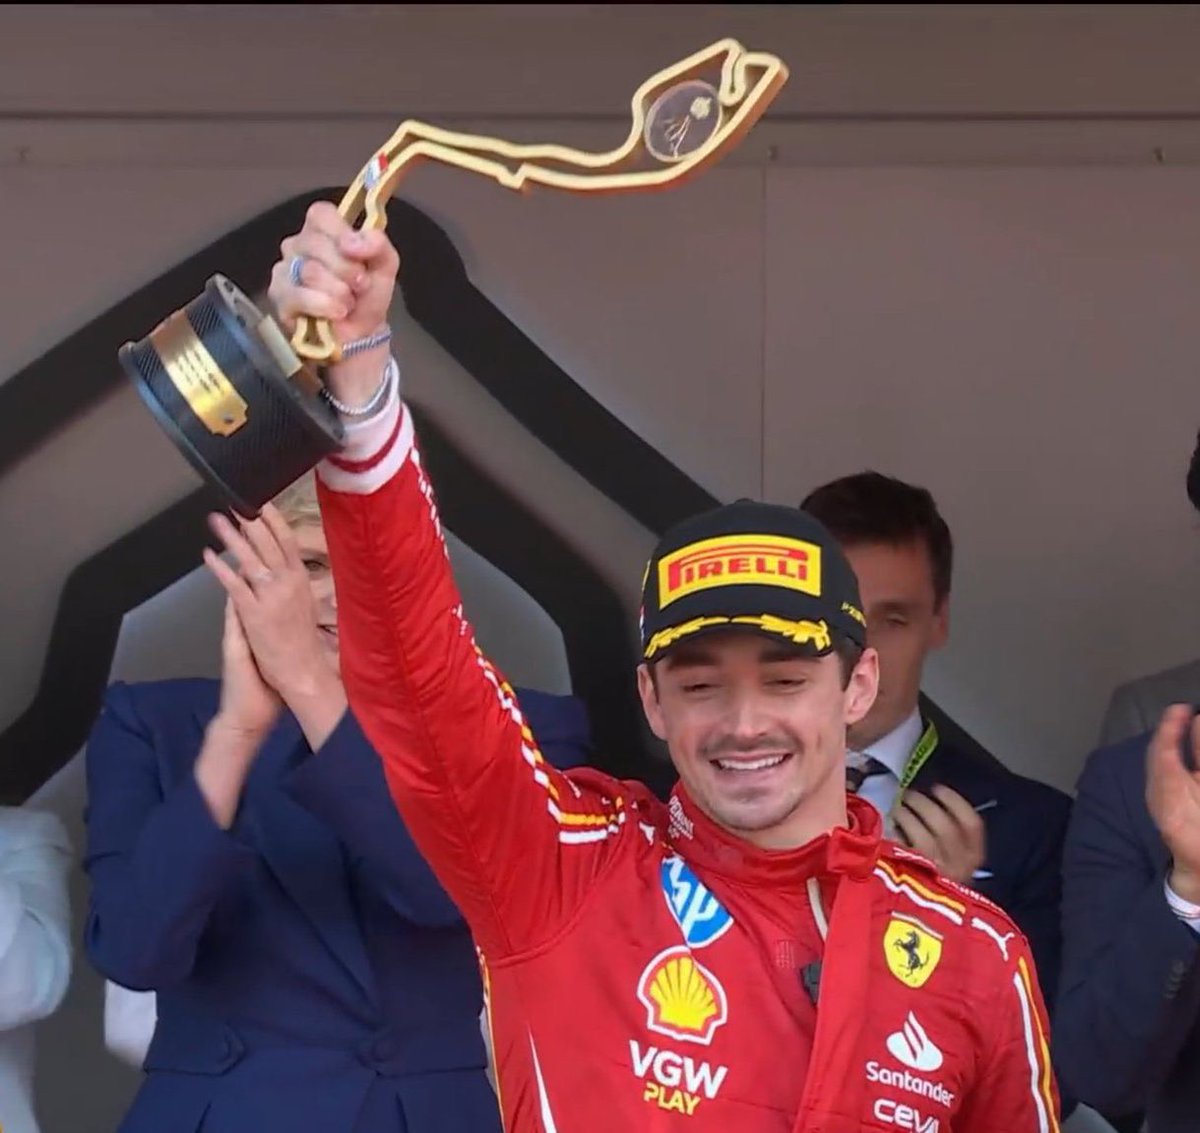 0 days fcking 0 days since Charles Leclerc has won a race